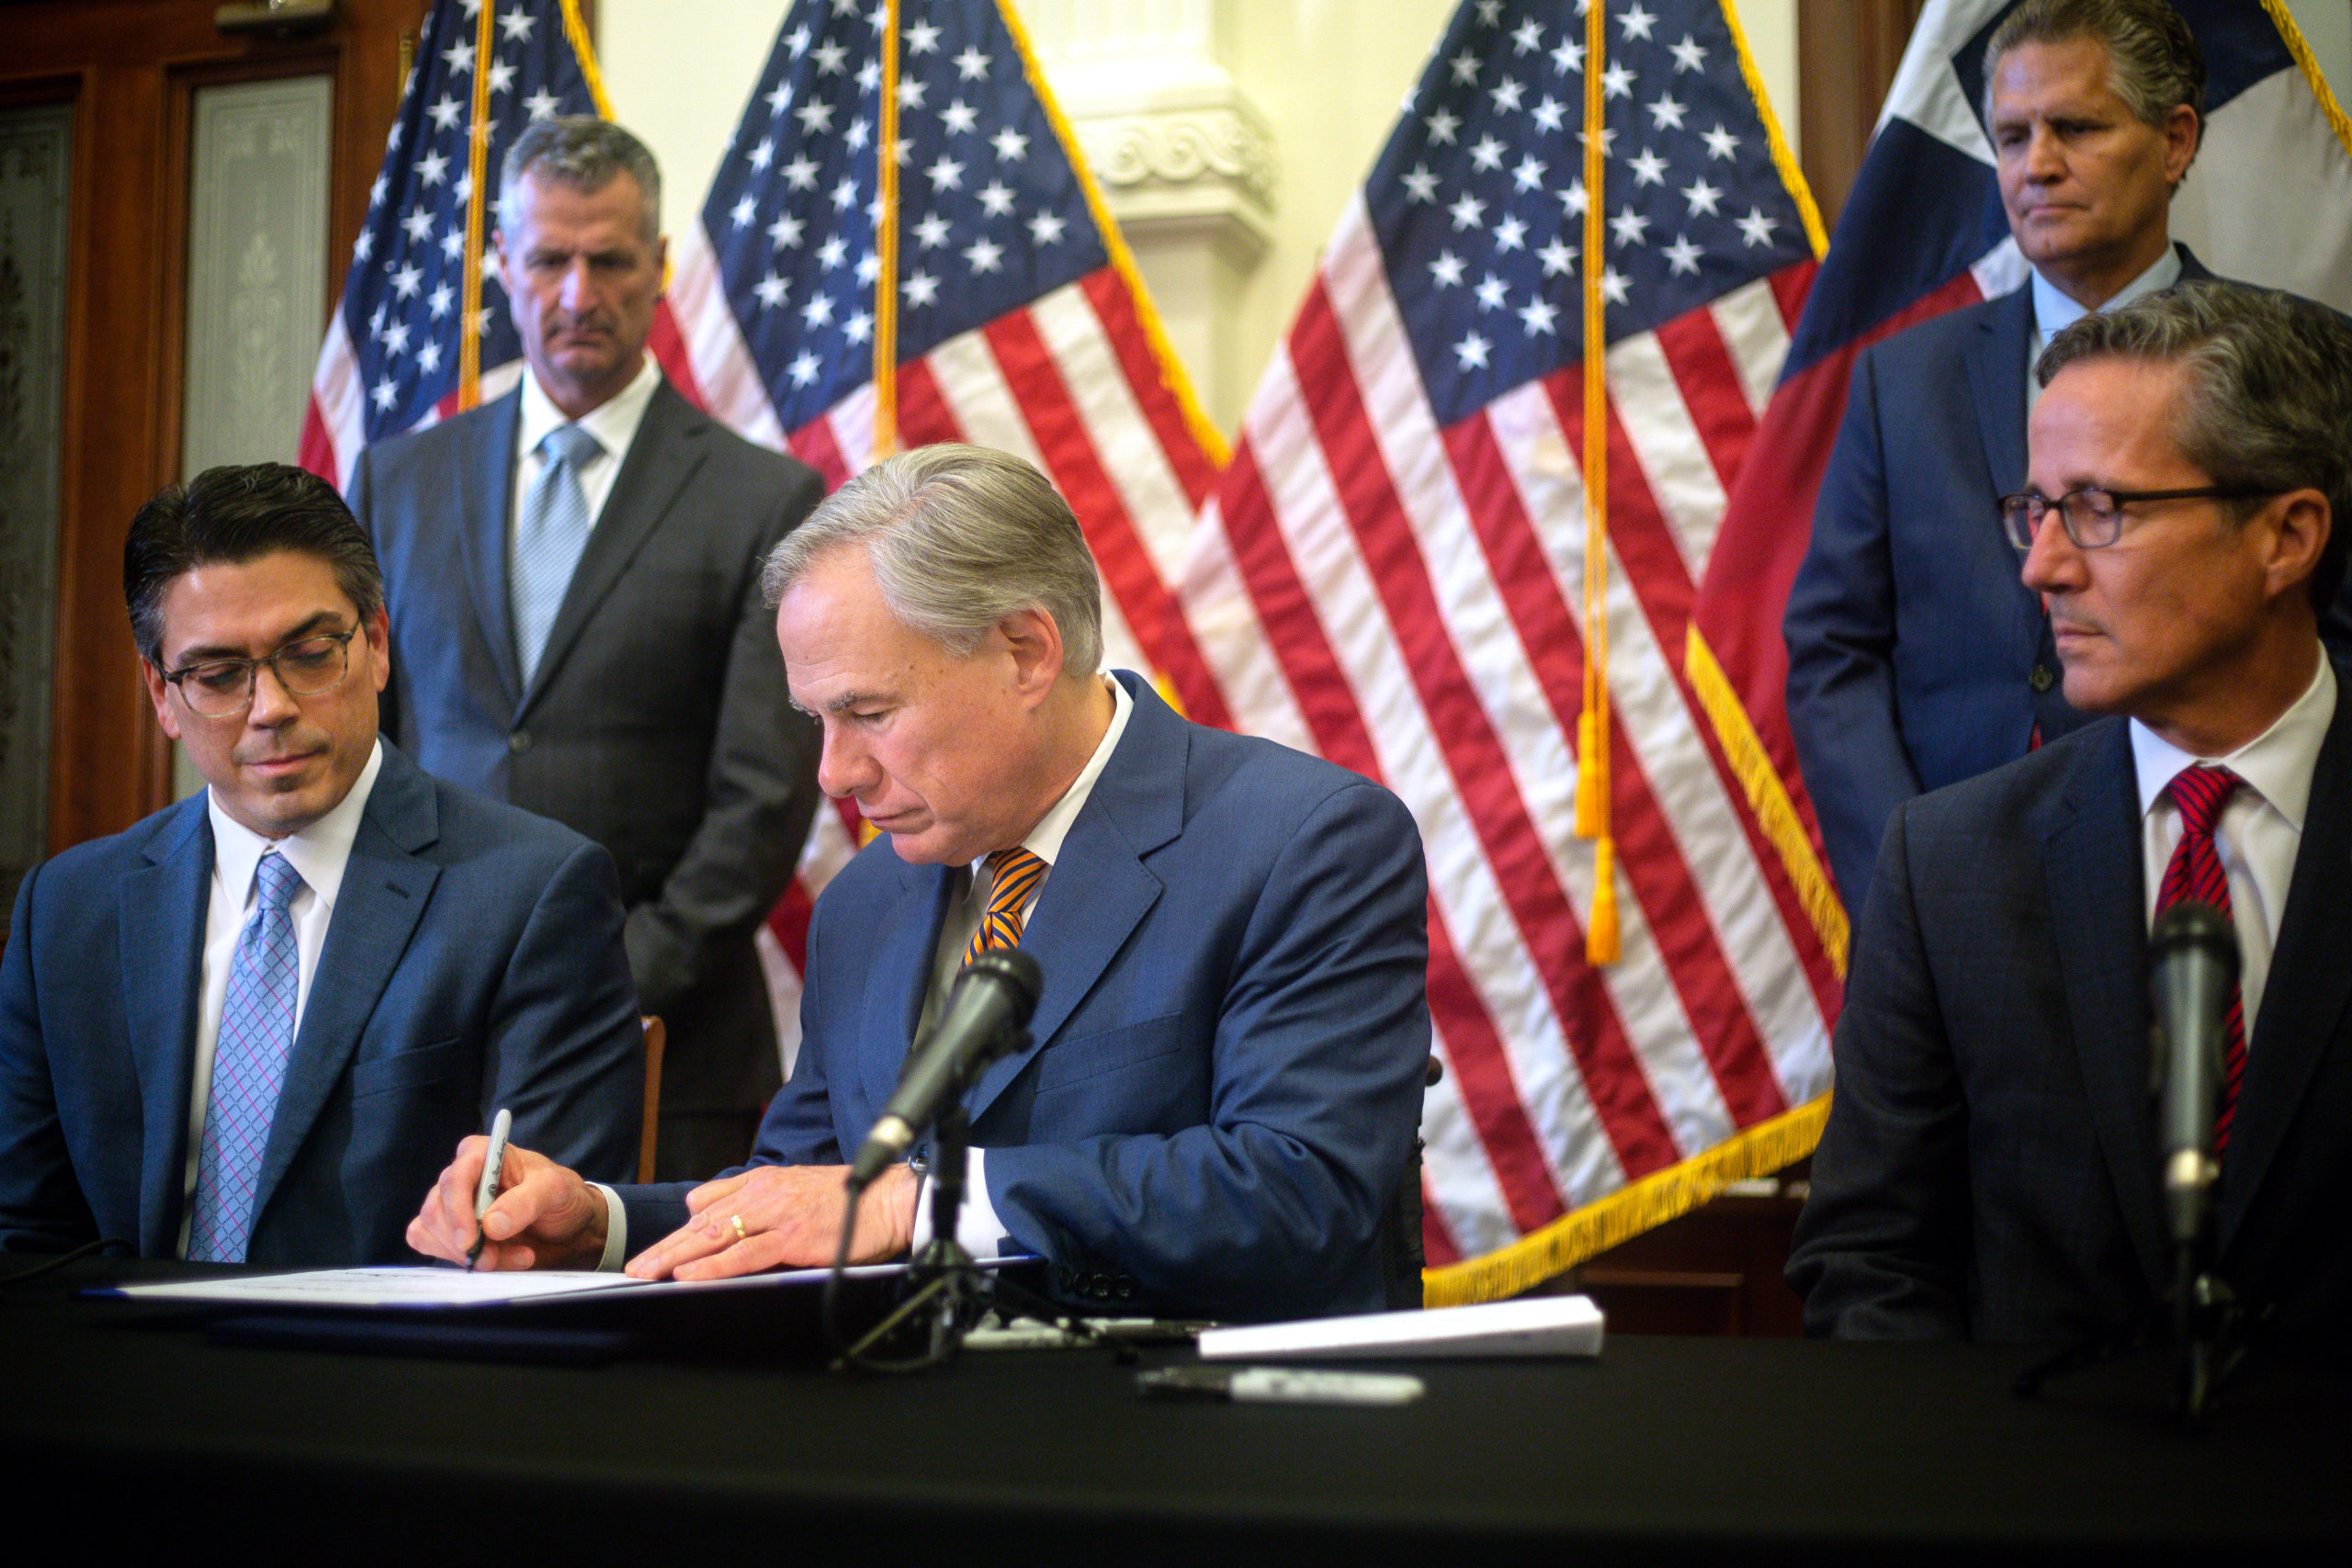 State Rep. Chris Paddie (L) and State Senator Kelly Hancock (R) watch as Texas Governor Greg Abbott signs Senate Bills 2 and 3 during a press conference at the Capitol on June 8, 2021 in Austin, Texas.